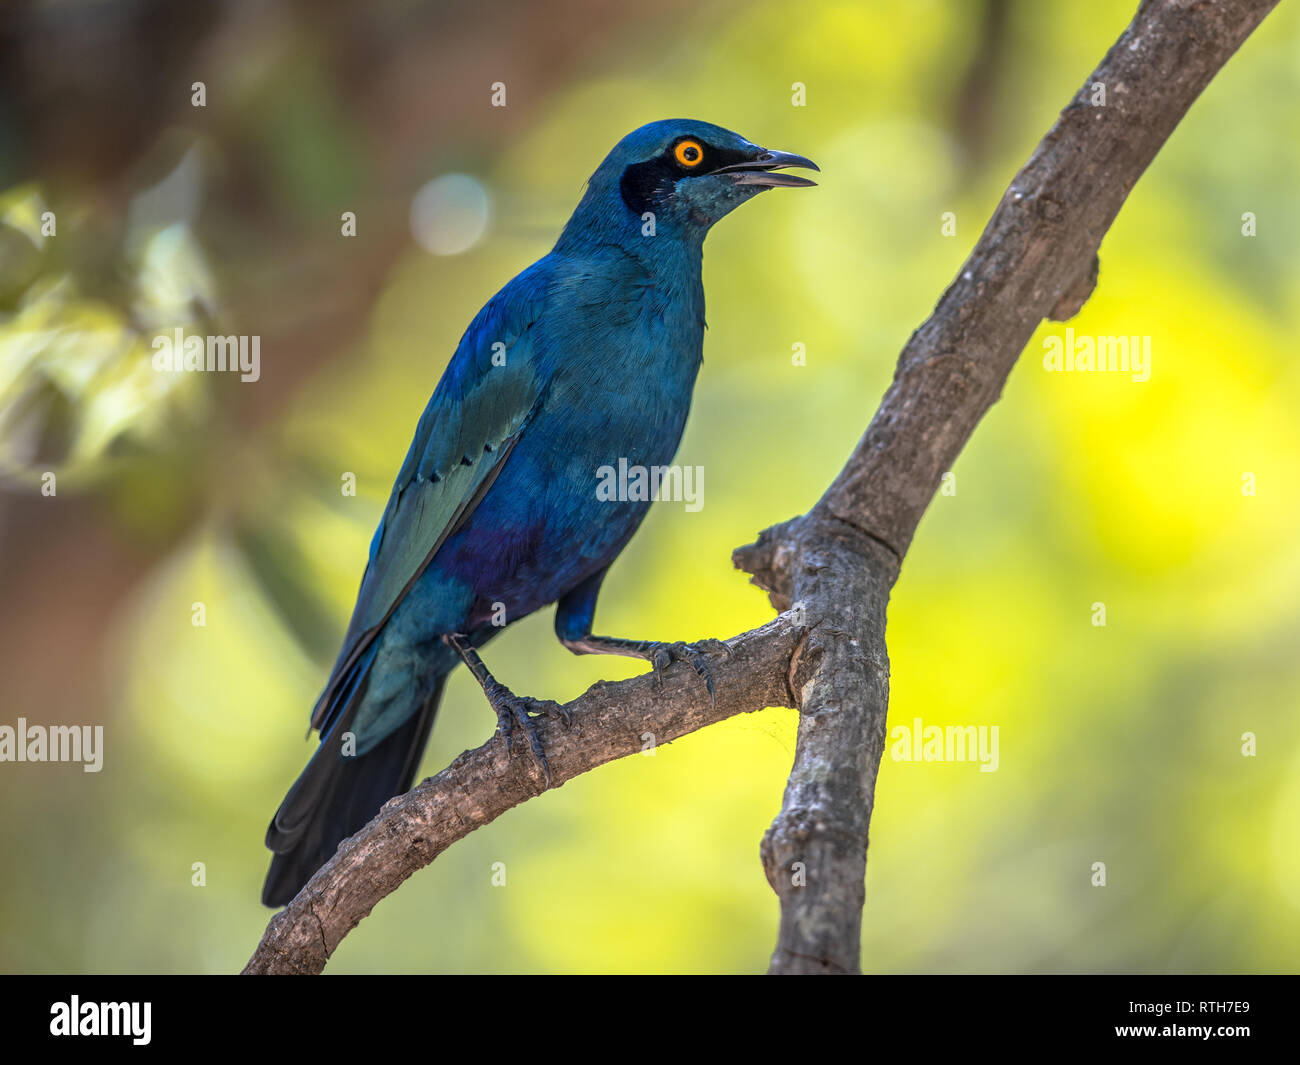 Greater blue-eared Starling (Lamprotornis chalybaeus) bird perched in shade of tree in Kruger national park South Africa Stock Photo